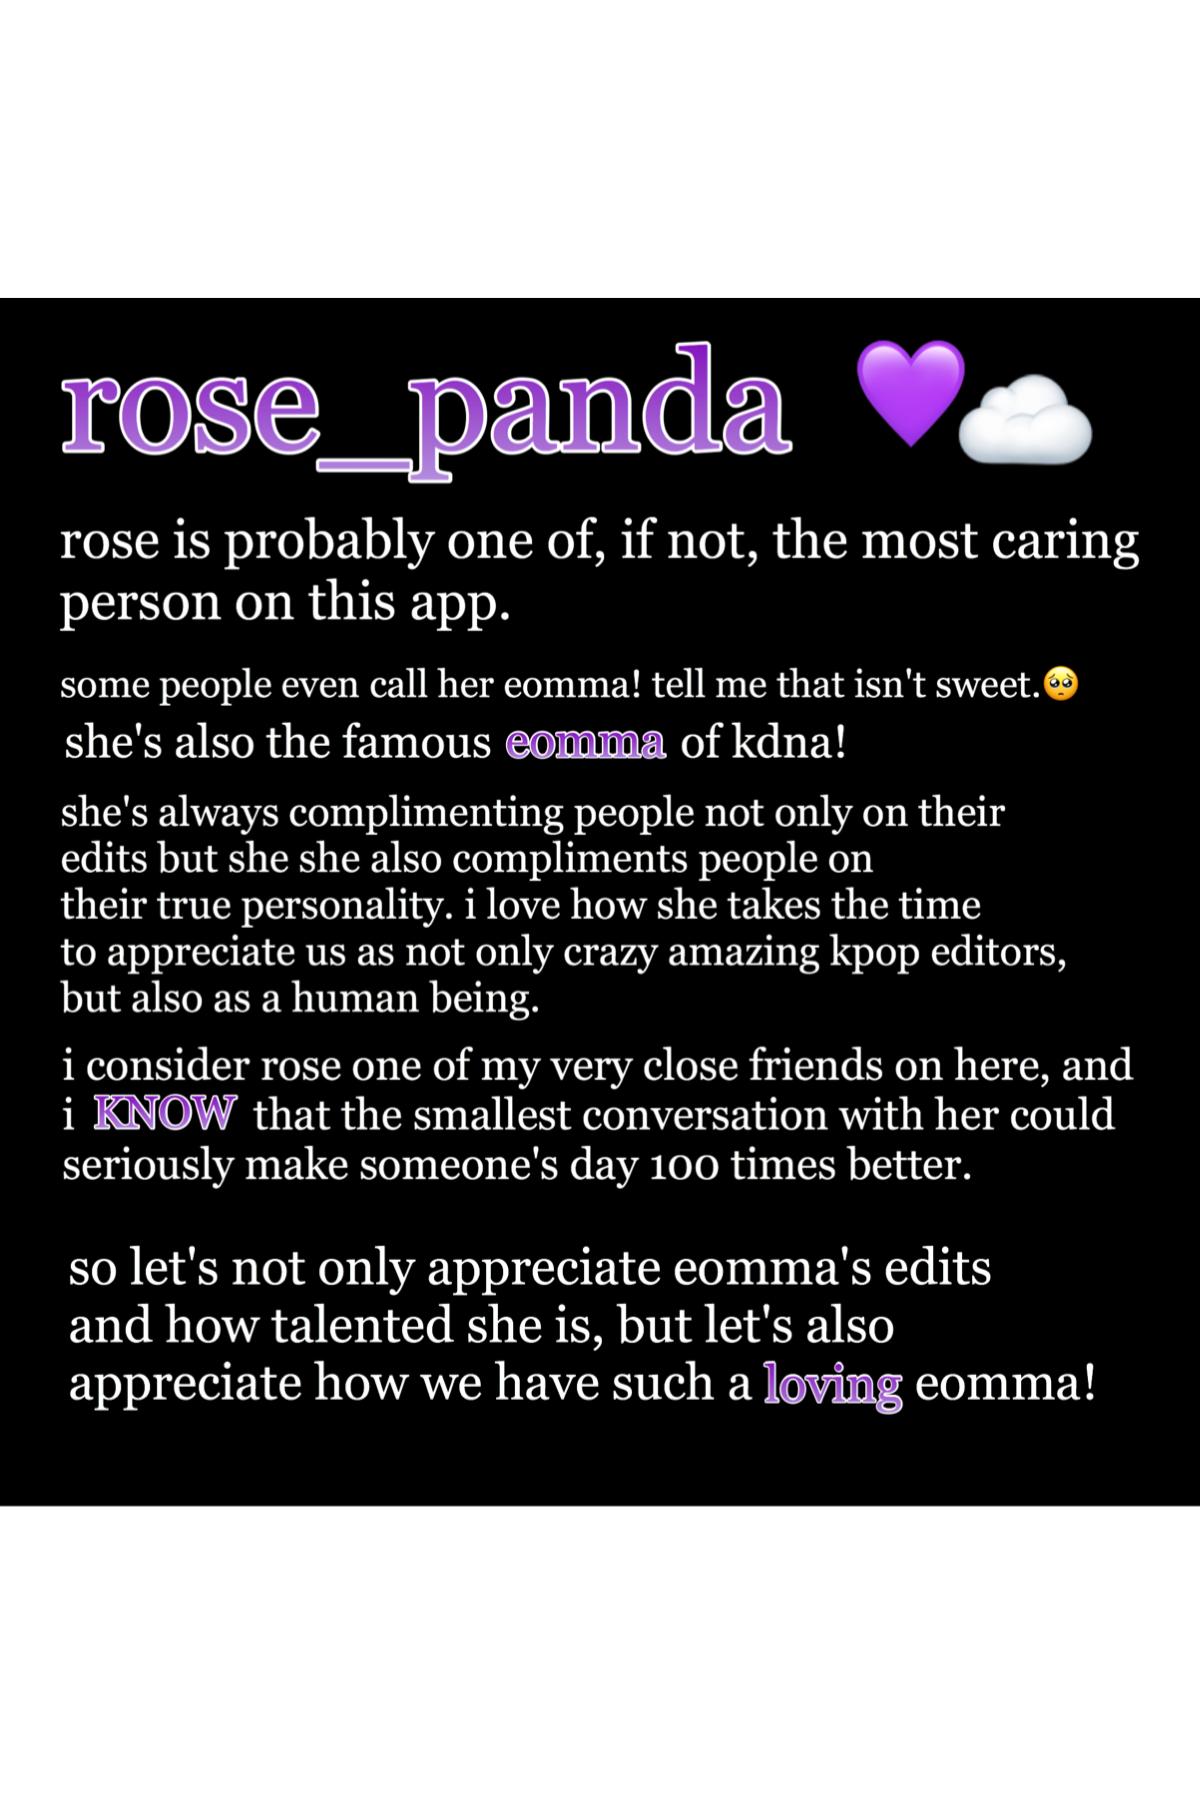 ☁️tap☁️
we purple you!
let's all love each other the way eomma loves us.🥺
*drumroll*
my blackpink bias is rosé!